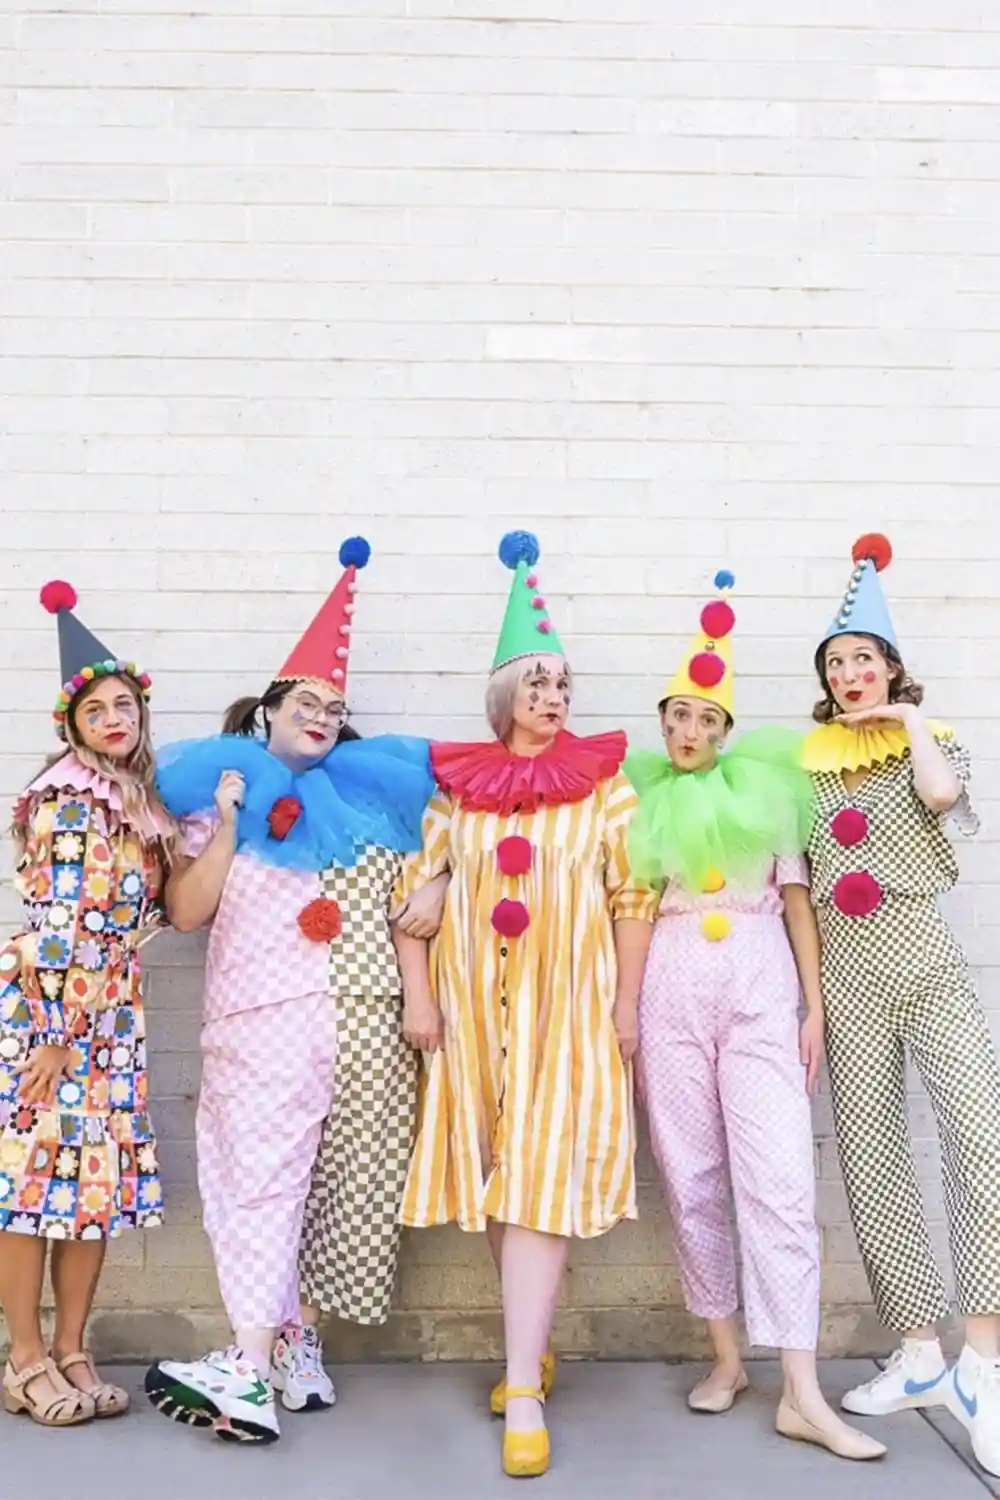 Carnival Party Ideas - Vintage Circus Clowns by The House That Lars Built